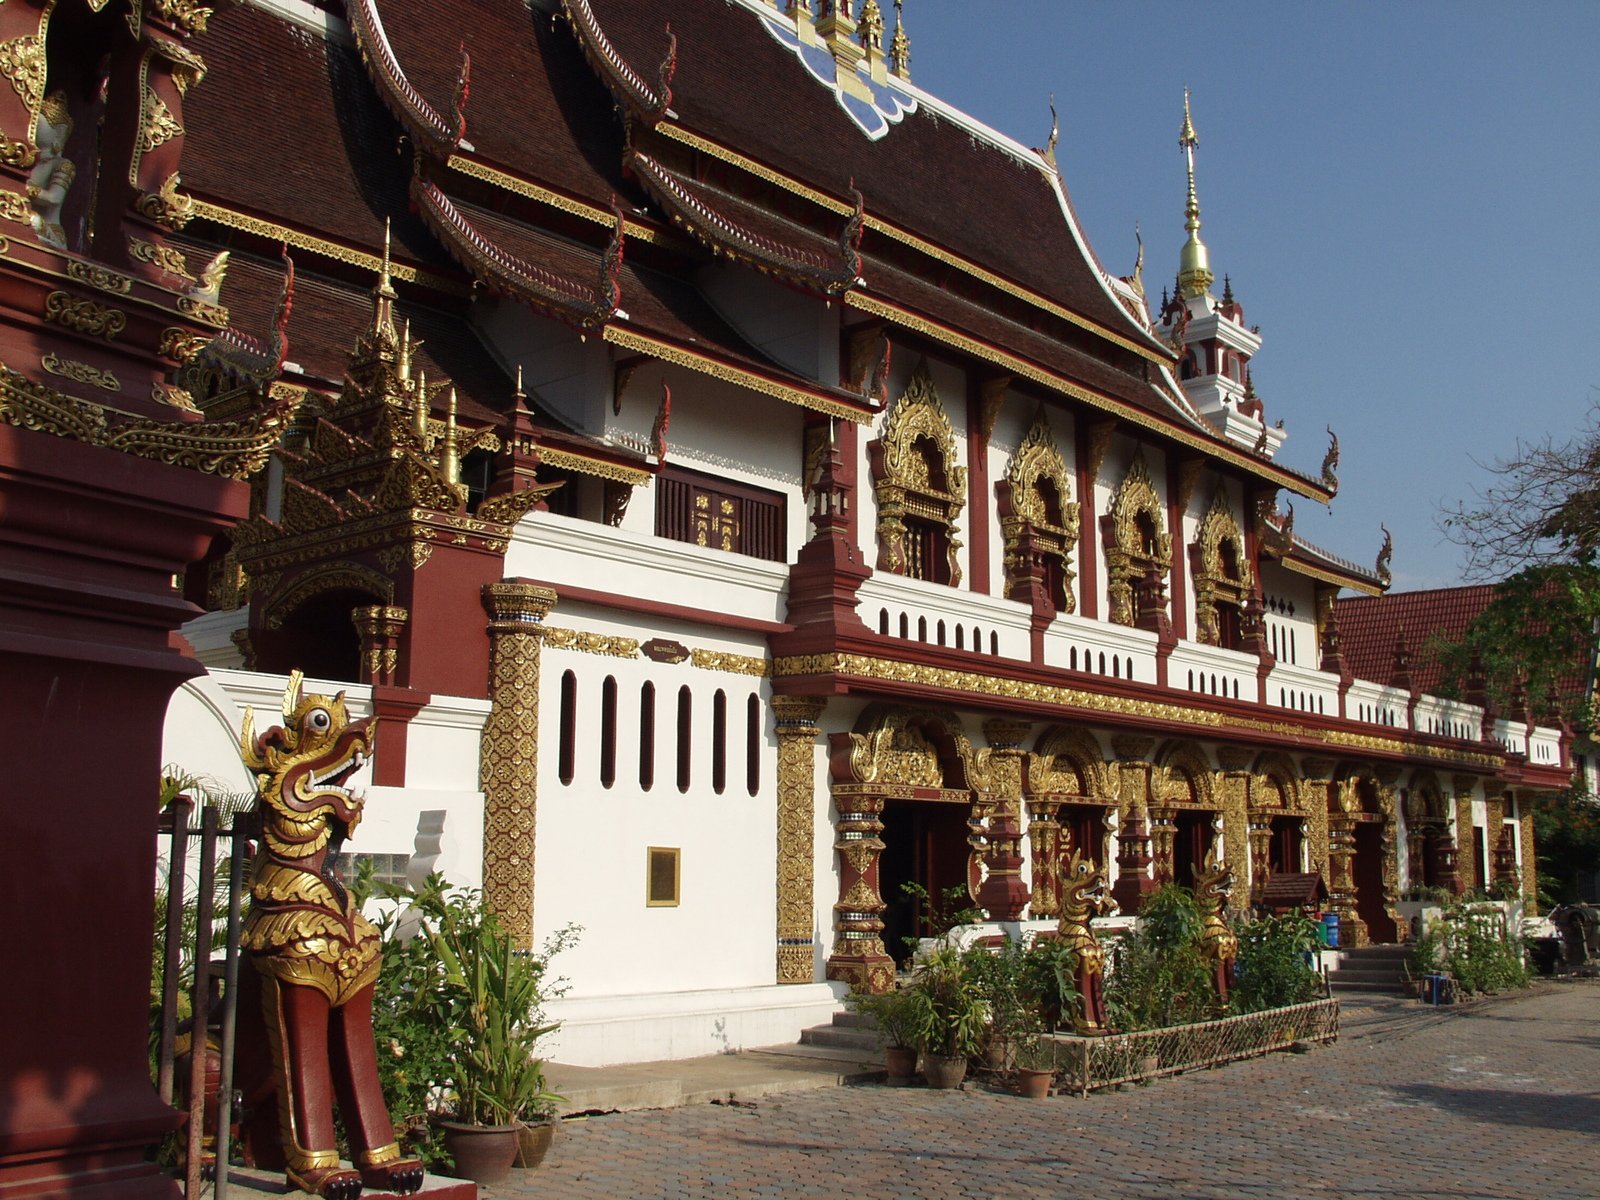 an elaborate building with a gold statue in front of it